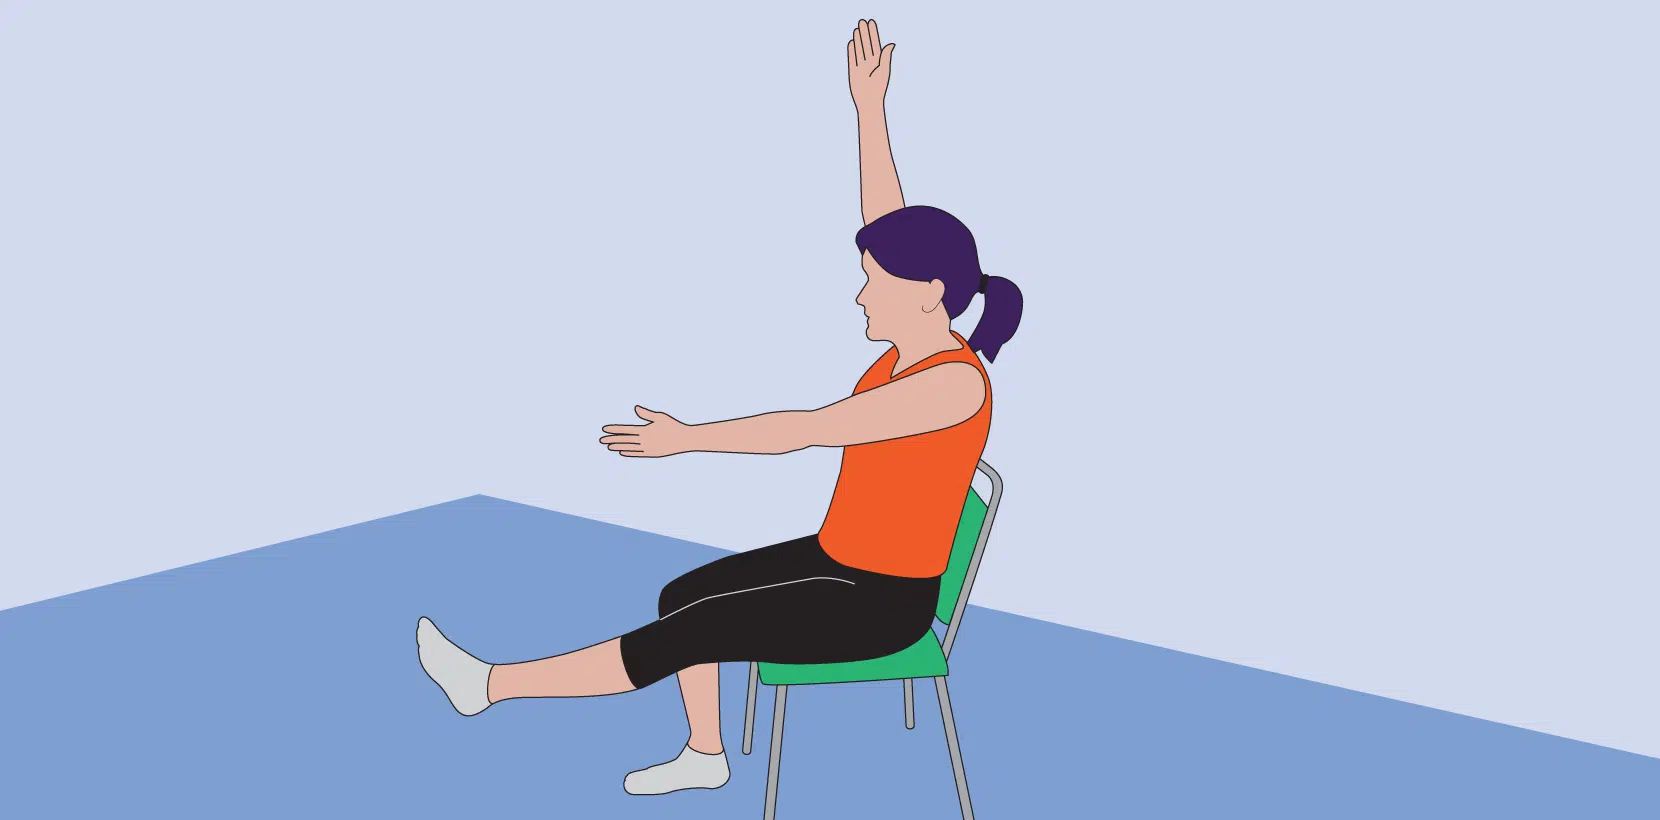 Chair Exercises for Seniors: Rediscover Pain-Free Daily Activities with A  Step-by-Step Illustrated Workout to Improve Balance and Strength in Just 10